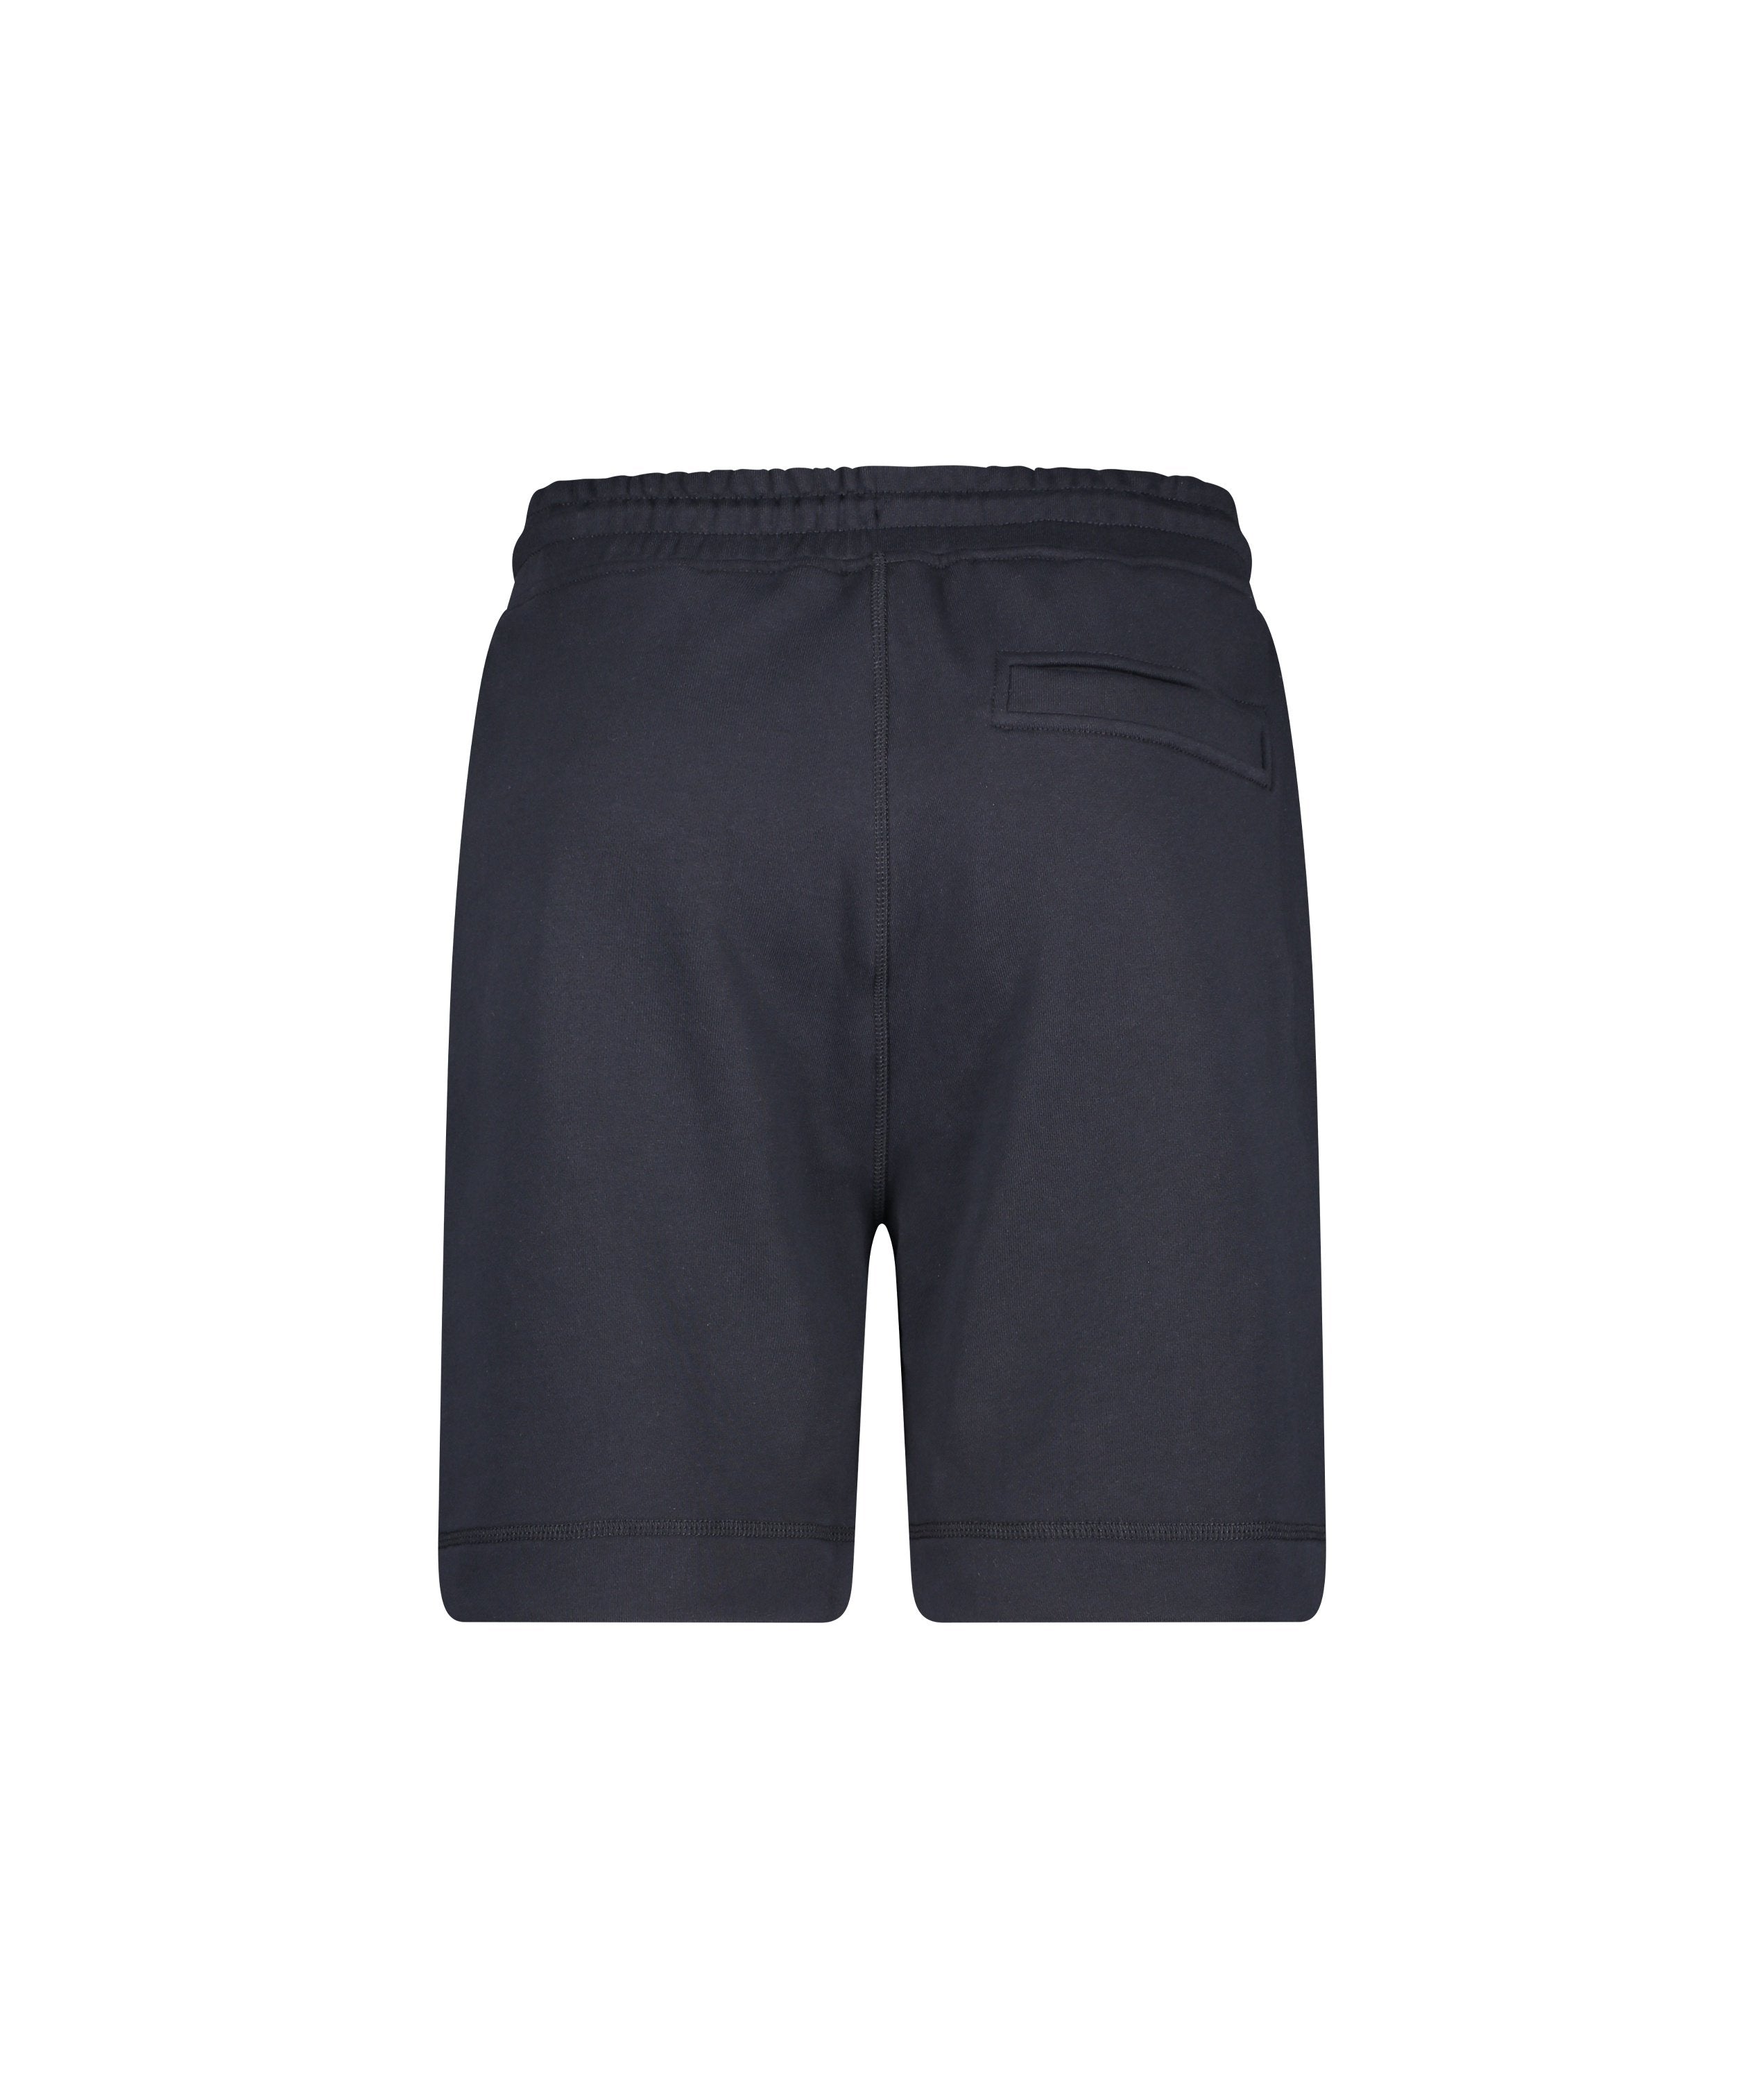 Sewalk Drawstring Shorts in French Terry Cotton with Logo Patch - Navy